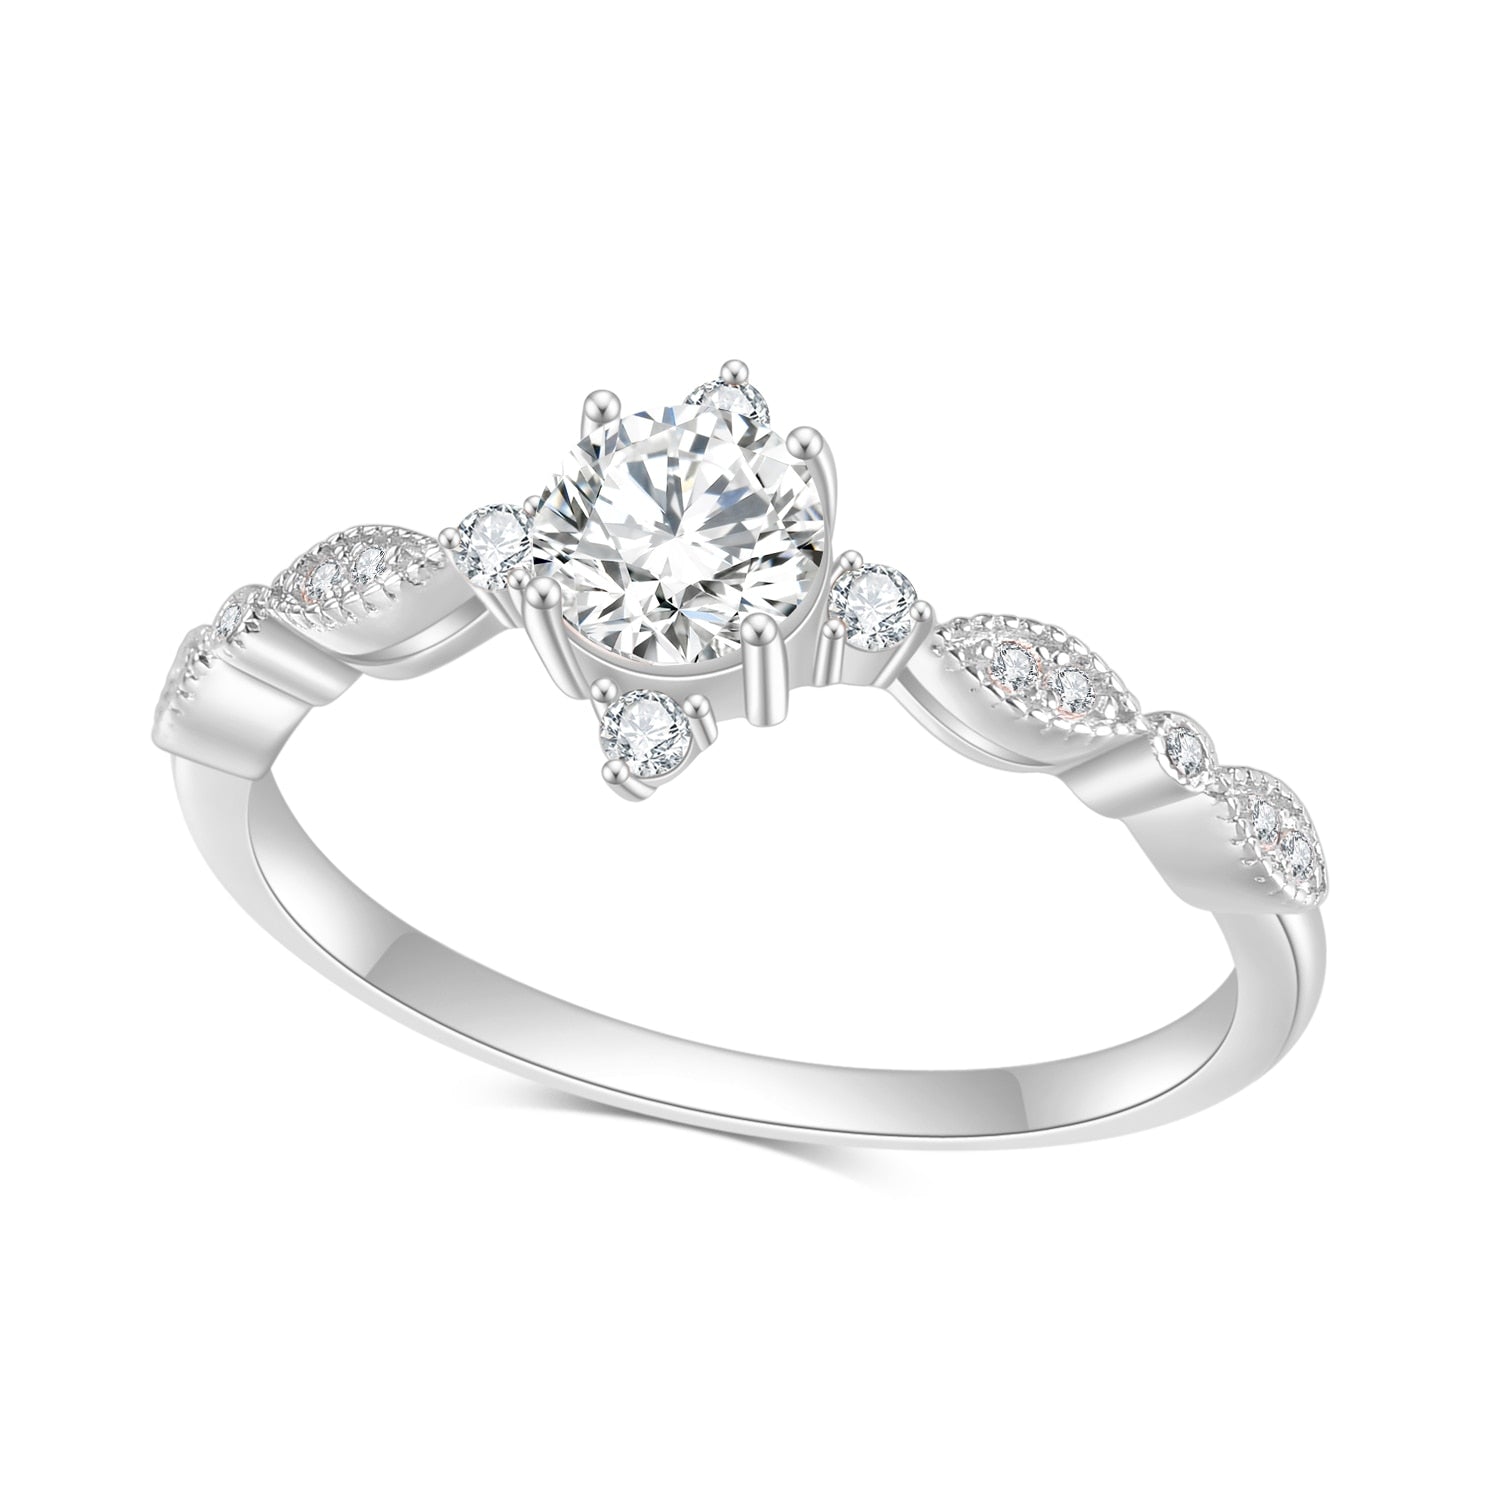 A silver vintage inspired engagement ring set with a round moissanite and 4 small zircons on all four sides.